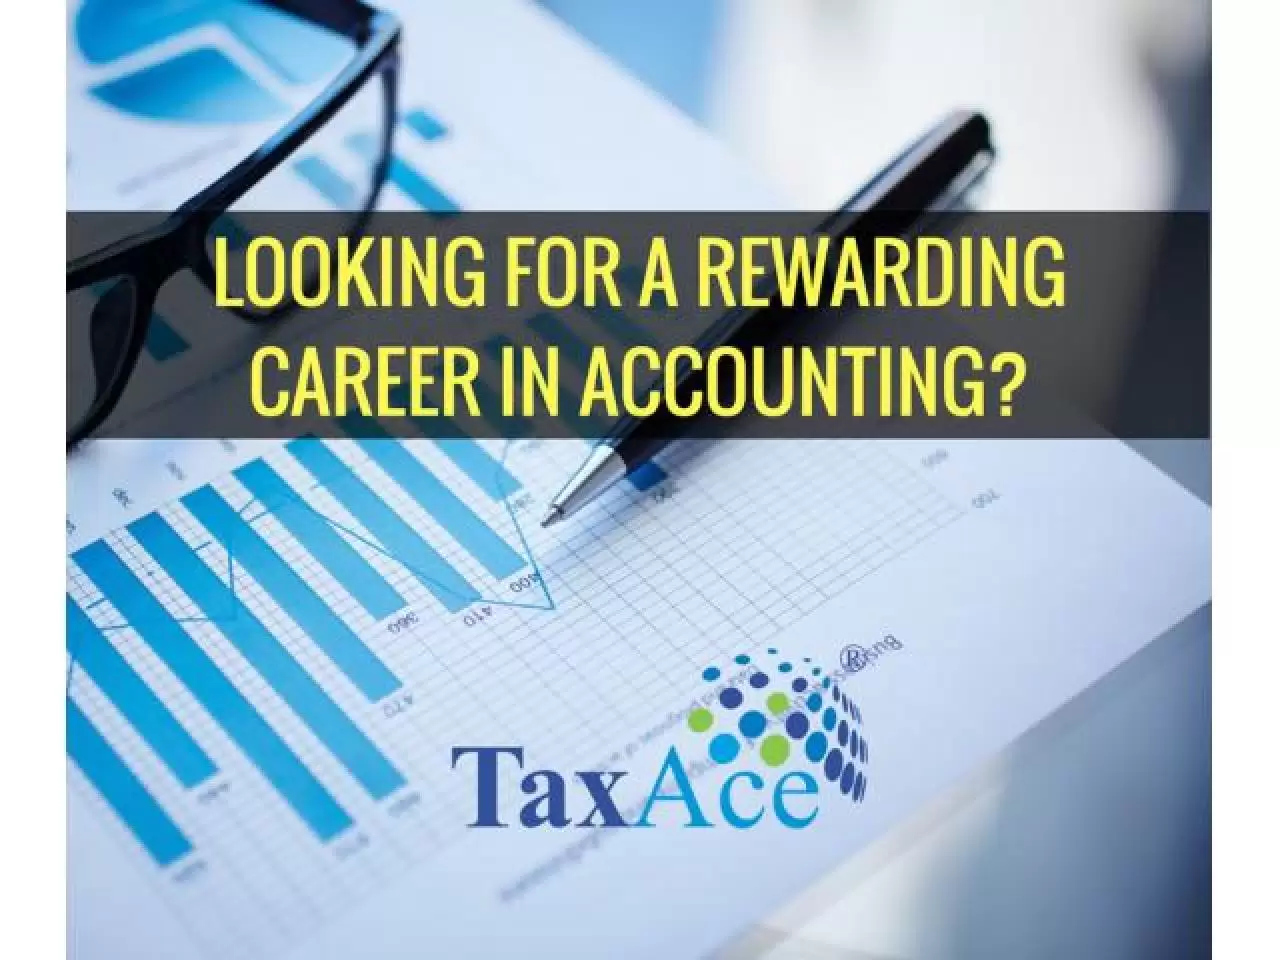 Looking for a rewarding career in Accounting? - 1